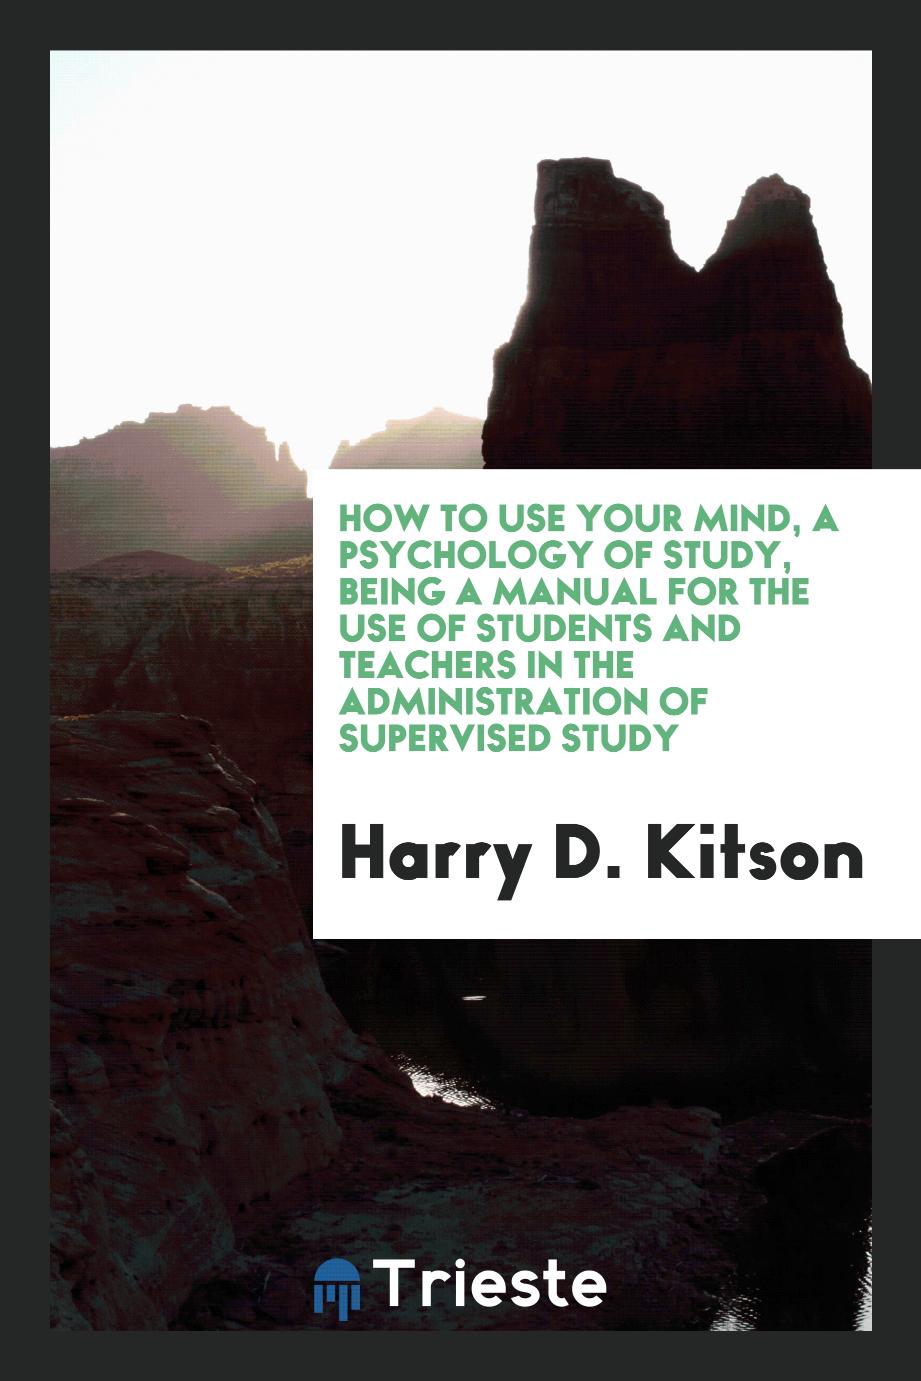 How to use your mind, a psychology of study, being a manual for the use of students and teachers in the administration of supervised study